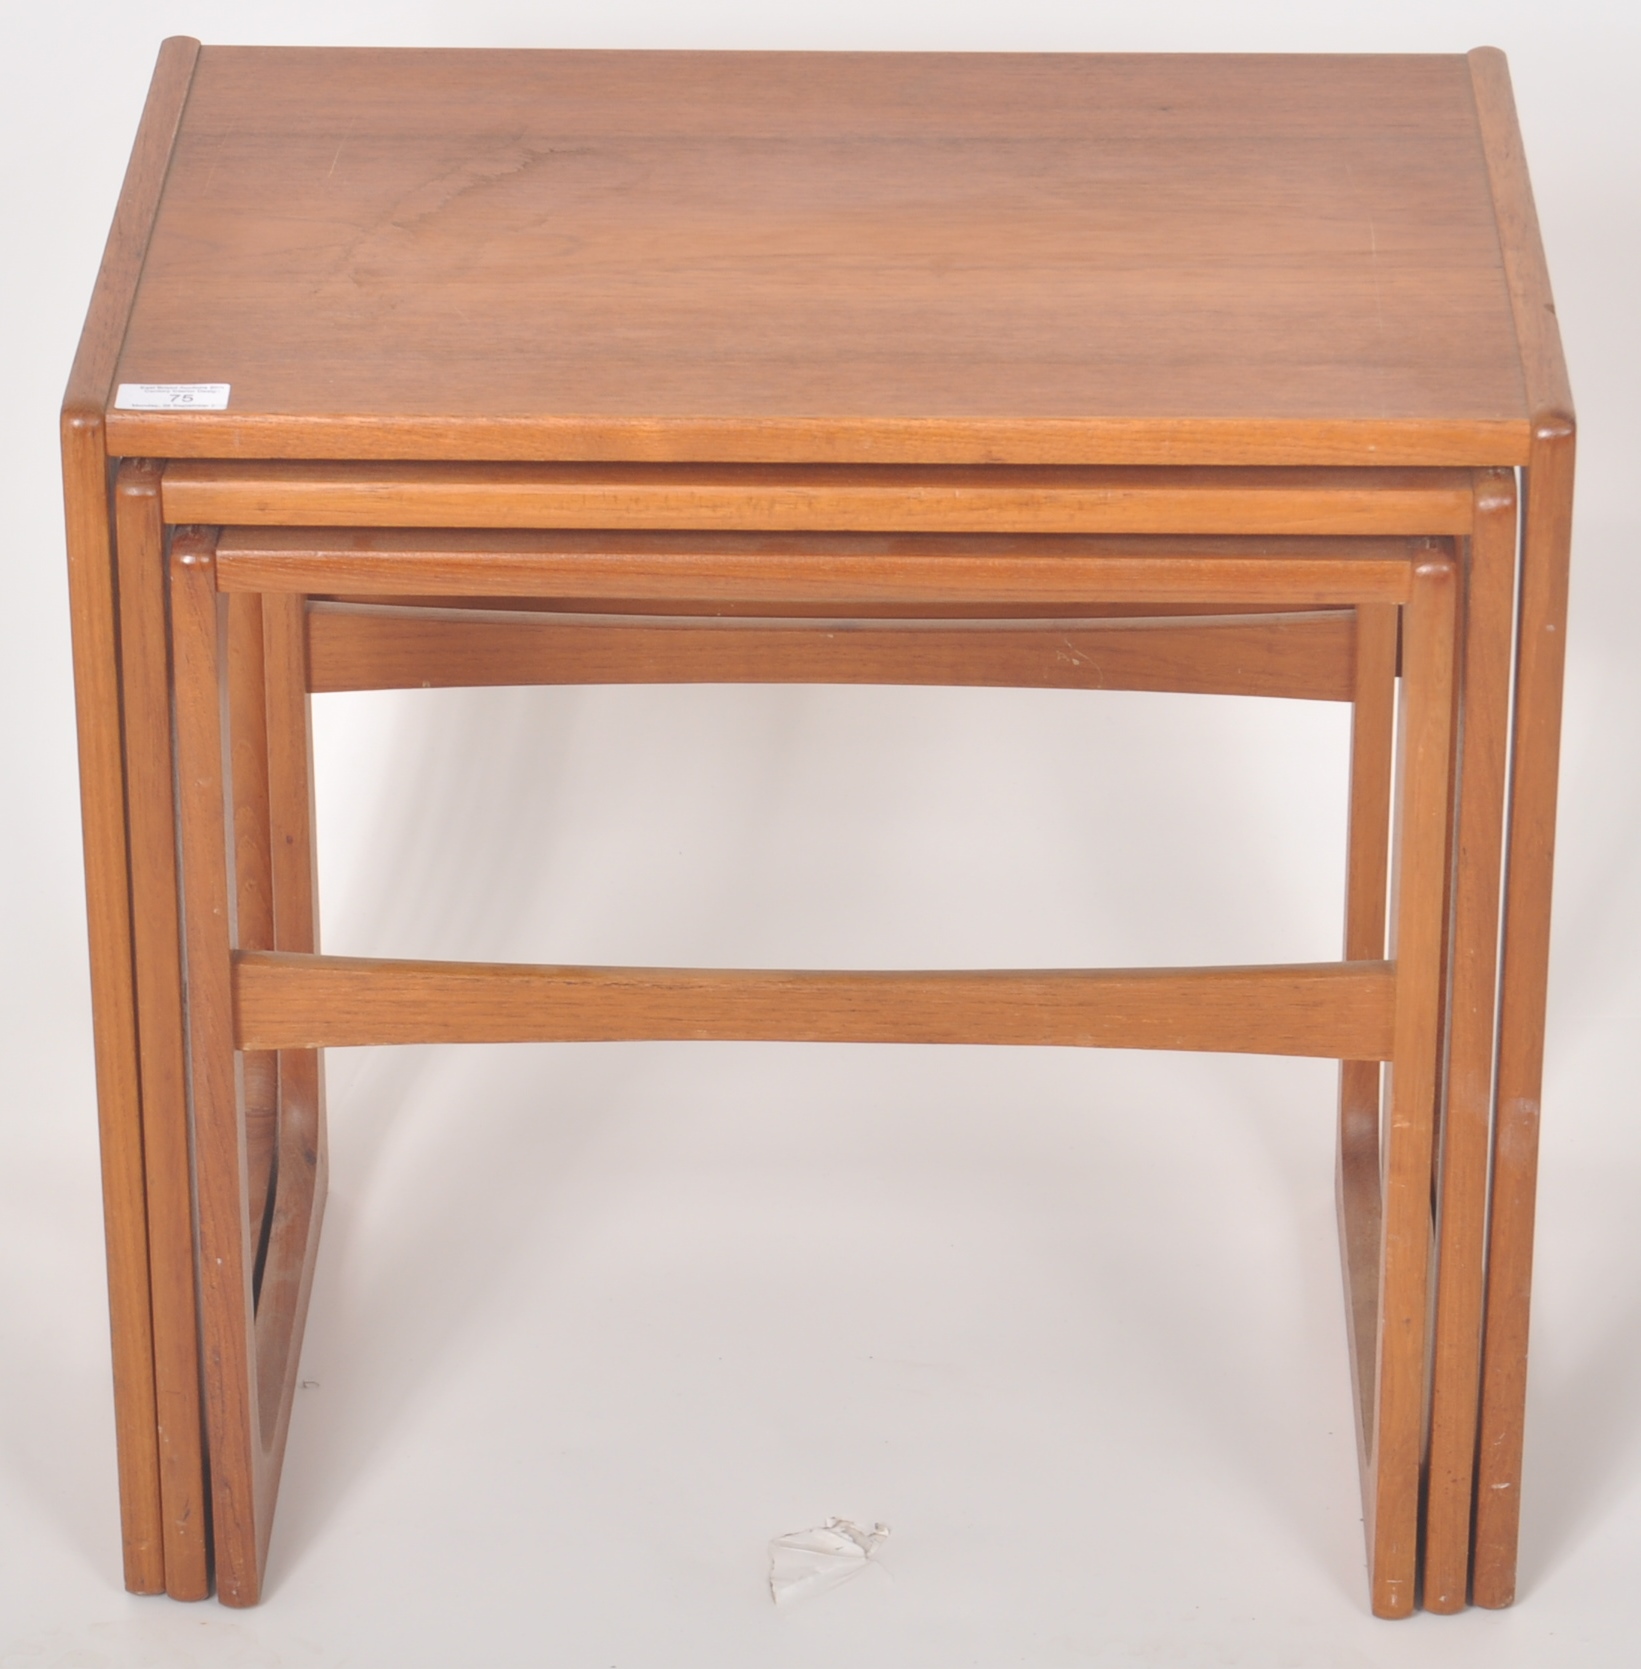 BR GELSTED - DANISH MID CENTURY TEAK NEST OF TABLES - Image 2 of 8